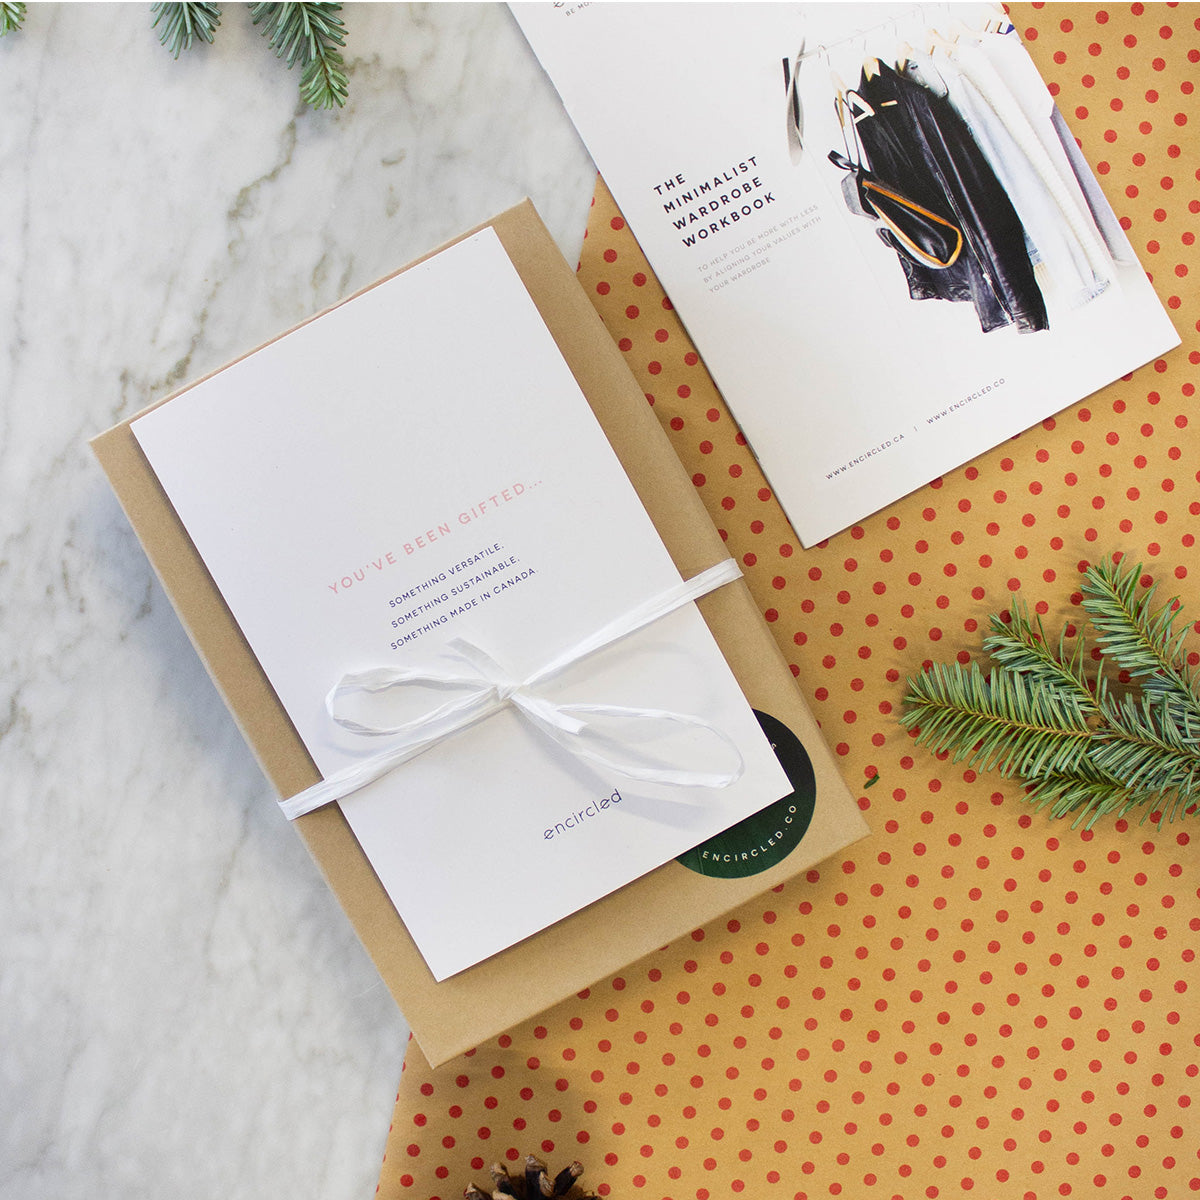 The Most Sustainable Holiday Gift Ideas